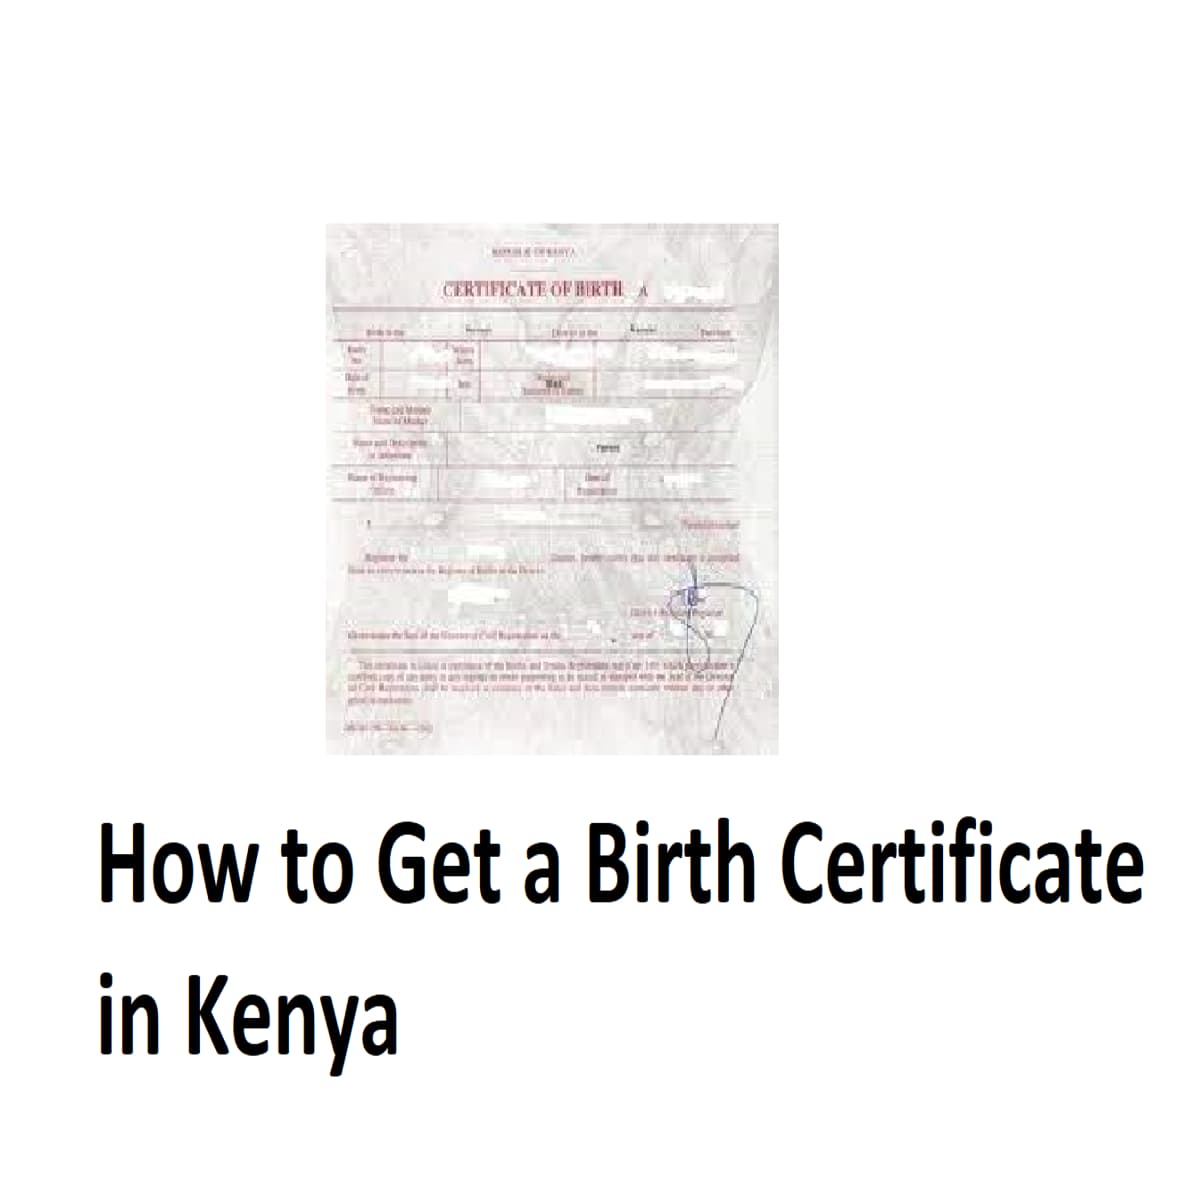 How to Get a Birth Certificate in Kenya